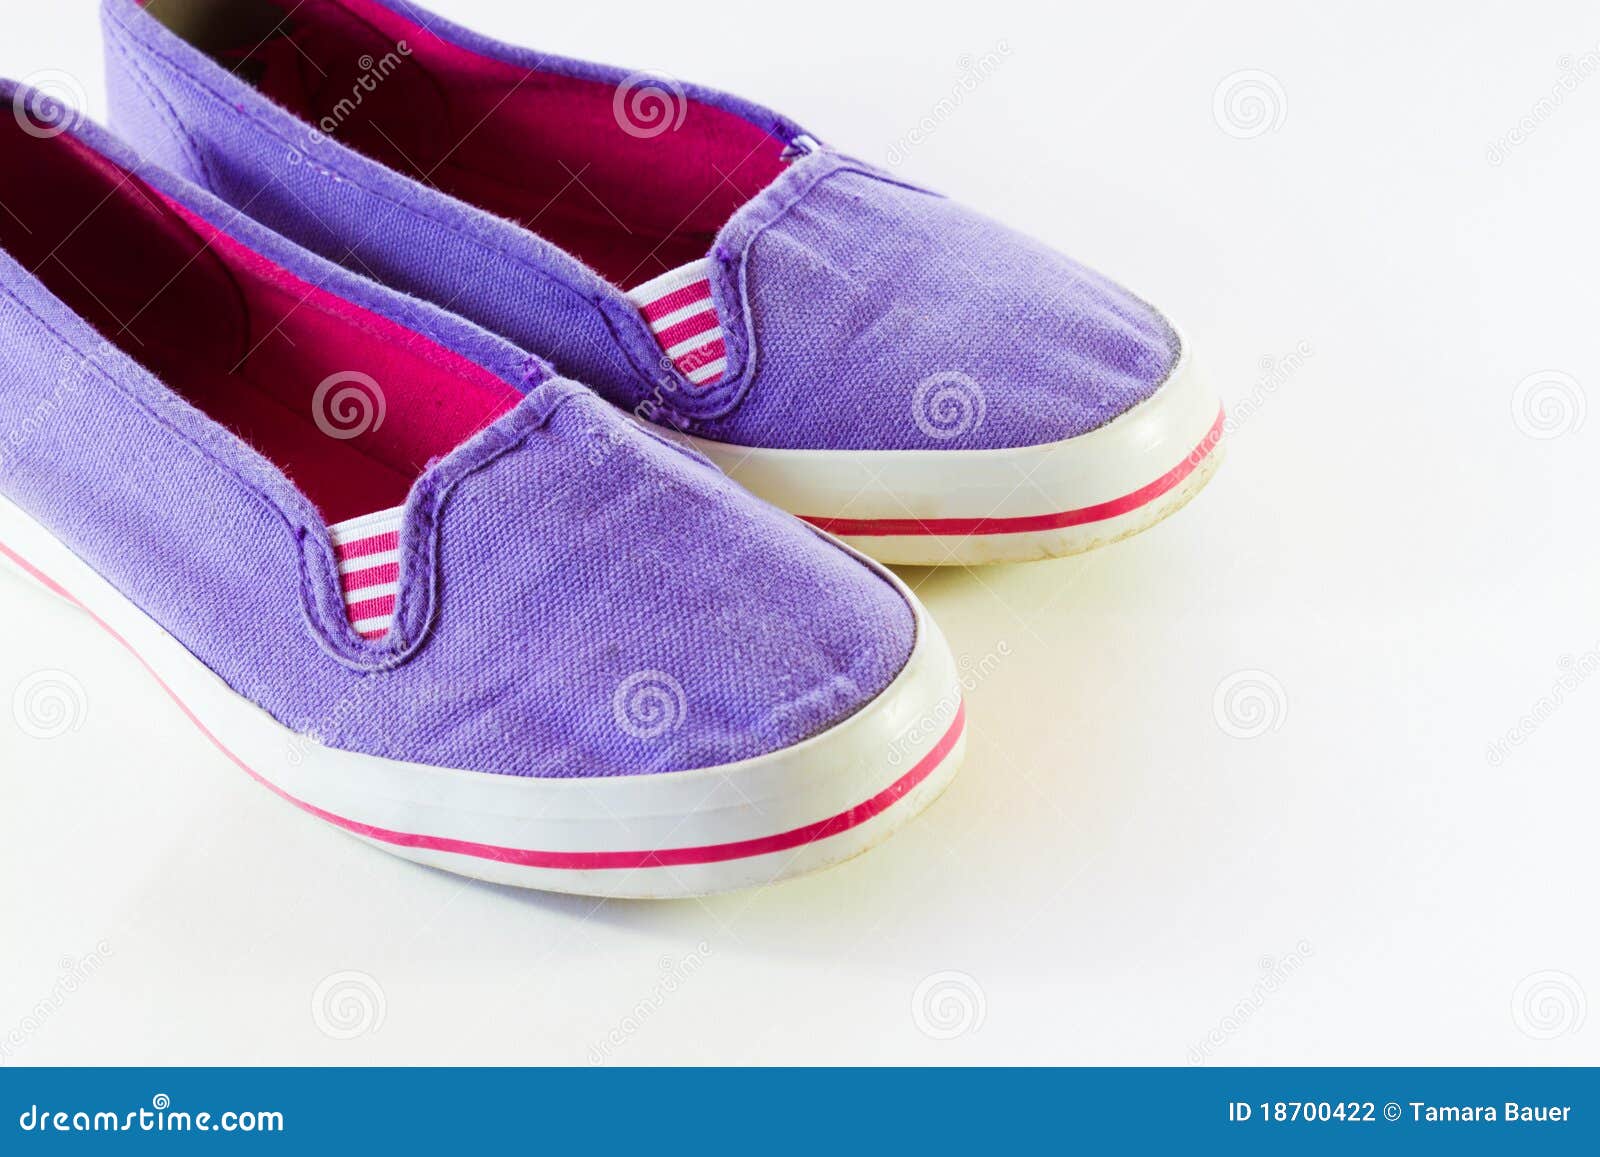 Kids shoes stock photo. Image of pair, used, white, modern - 18700422